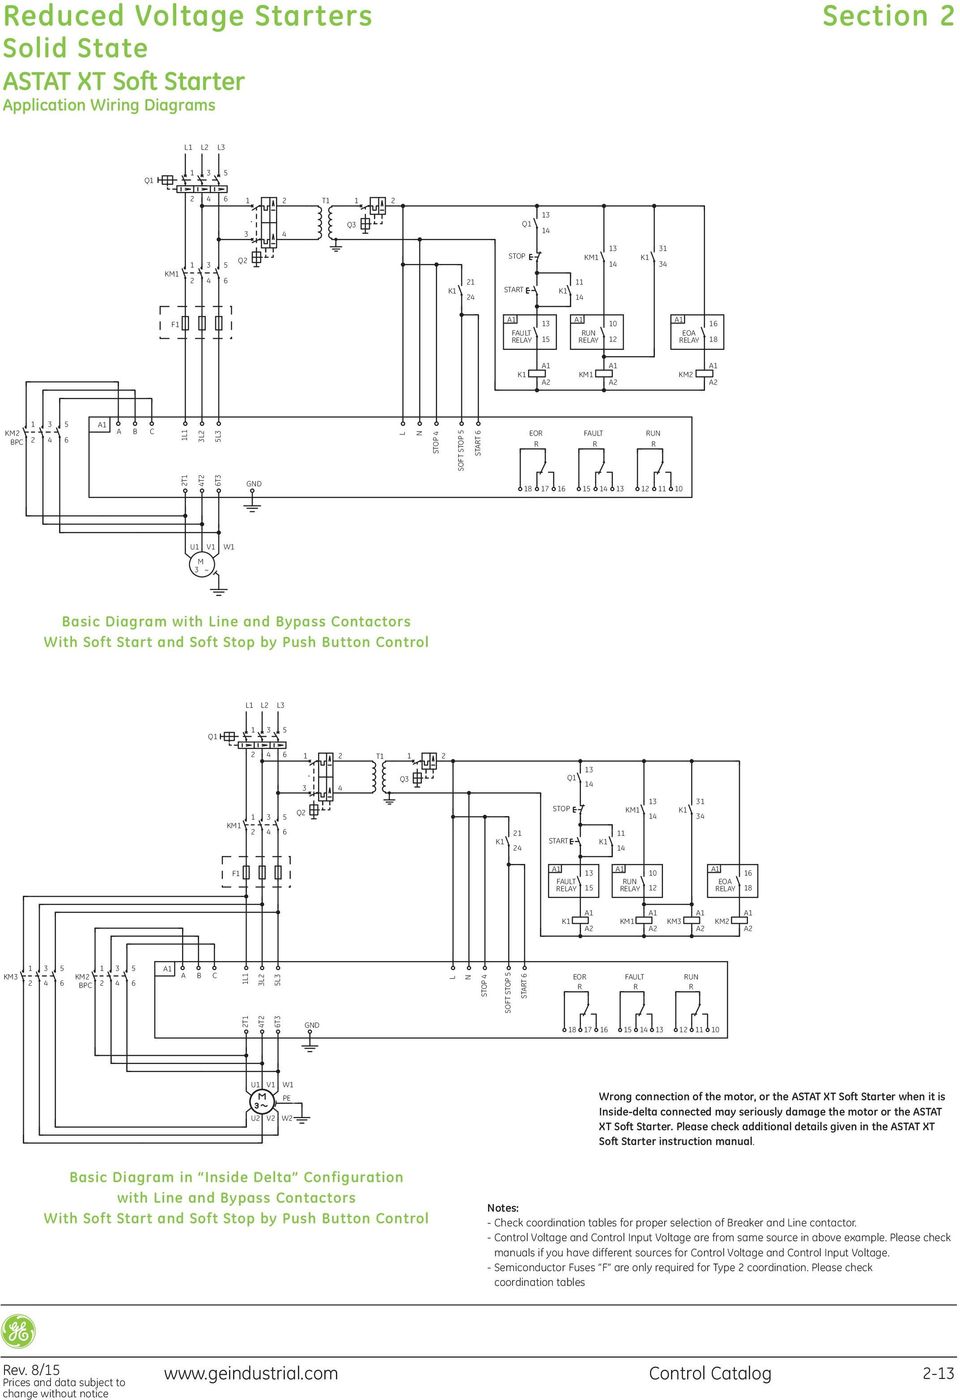 16 15 14 13 12 11 10 U1 V1 W1 M 3 ~ Basic Diagram with Line and Bypass Contactors With Soft Start and Soft Stop by Push Button Control L1 L2 L3 Q1 1 3 5 2 4 6 1 2 T1 1 2 3 4 Q3 Q1 13 14 KM1 1 2 3 4 5